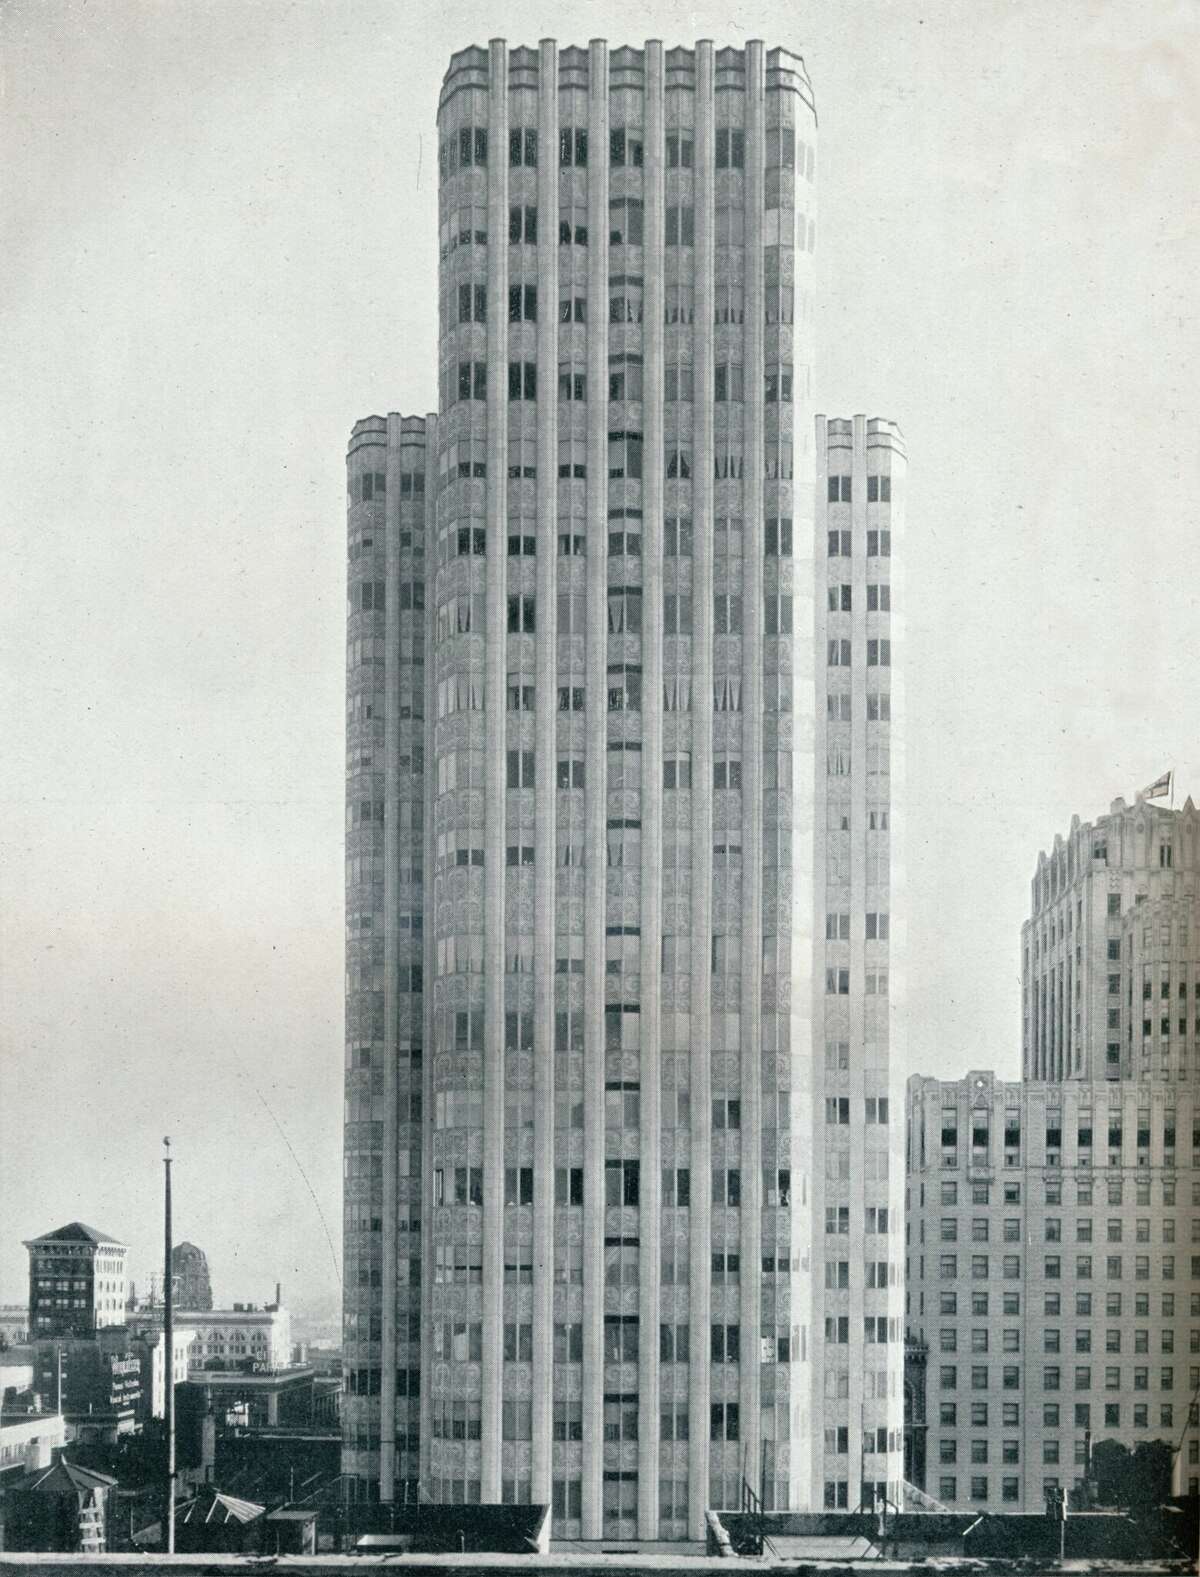 When it opened in 1929, the skyscraper at 450 Sutter St. was the second tallest building in San Francisco.